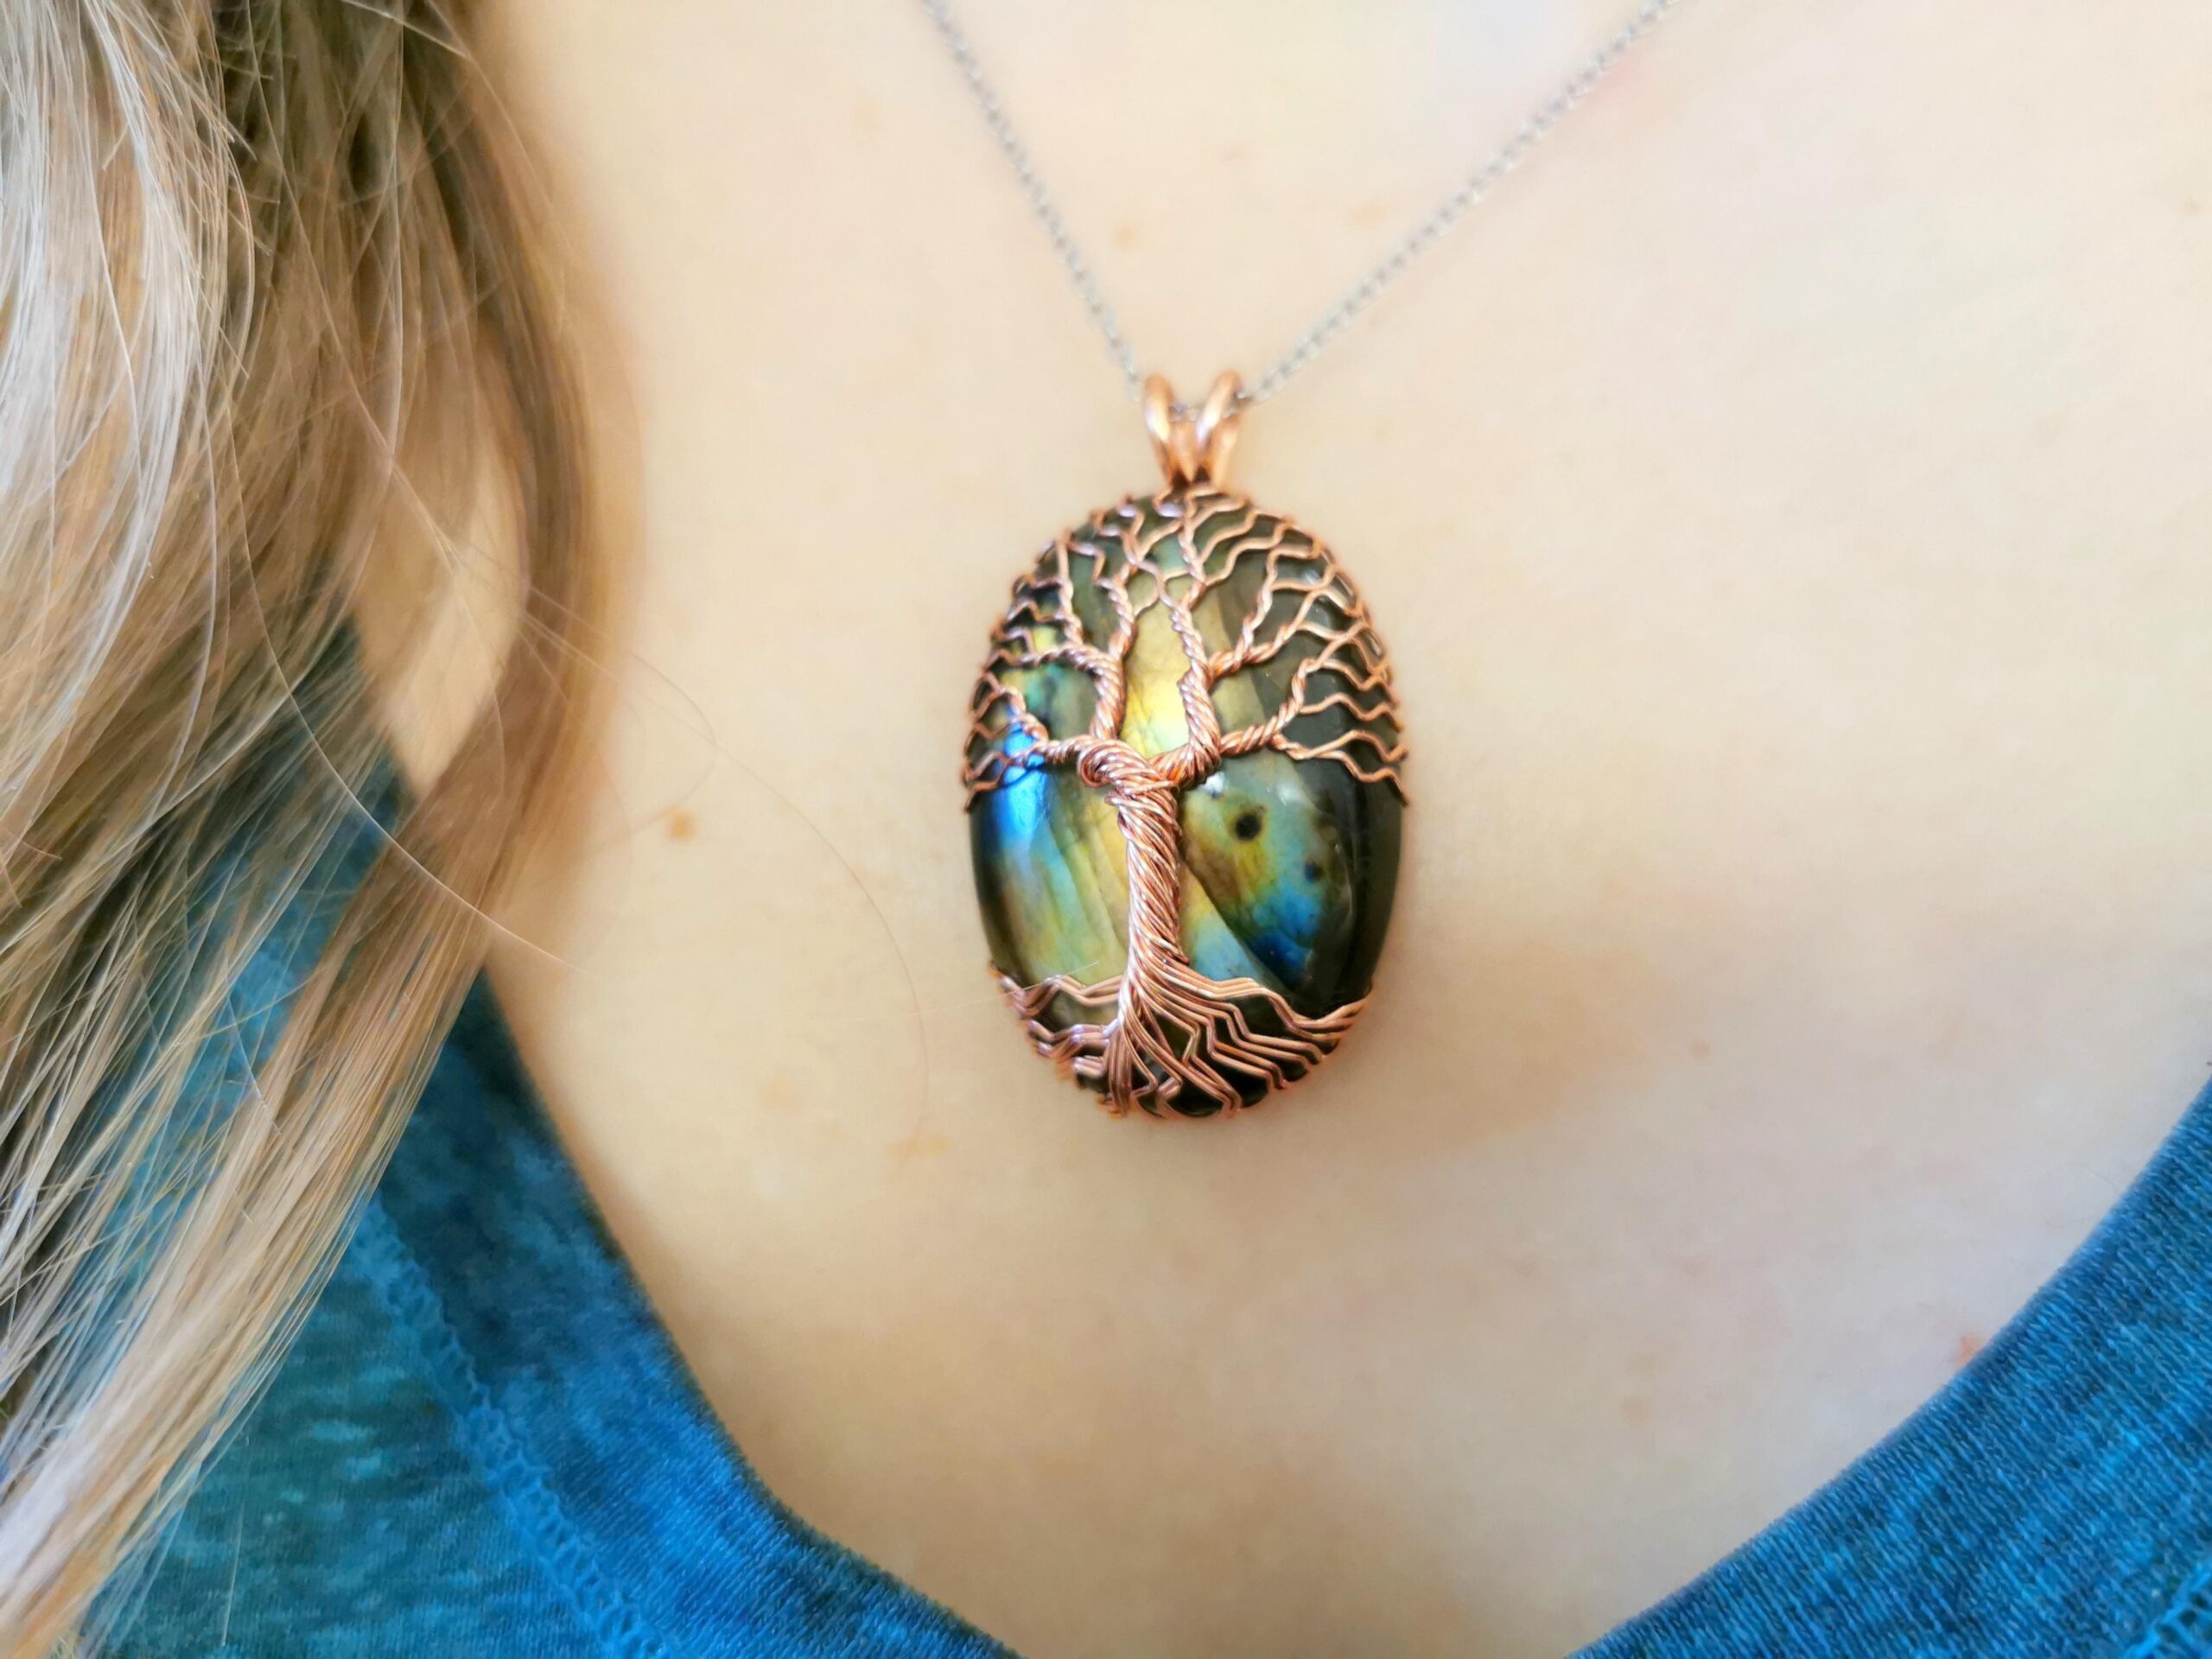 A copper tree on a labradorite gemstone, made by me.